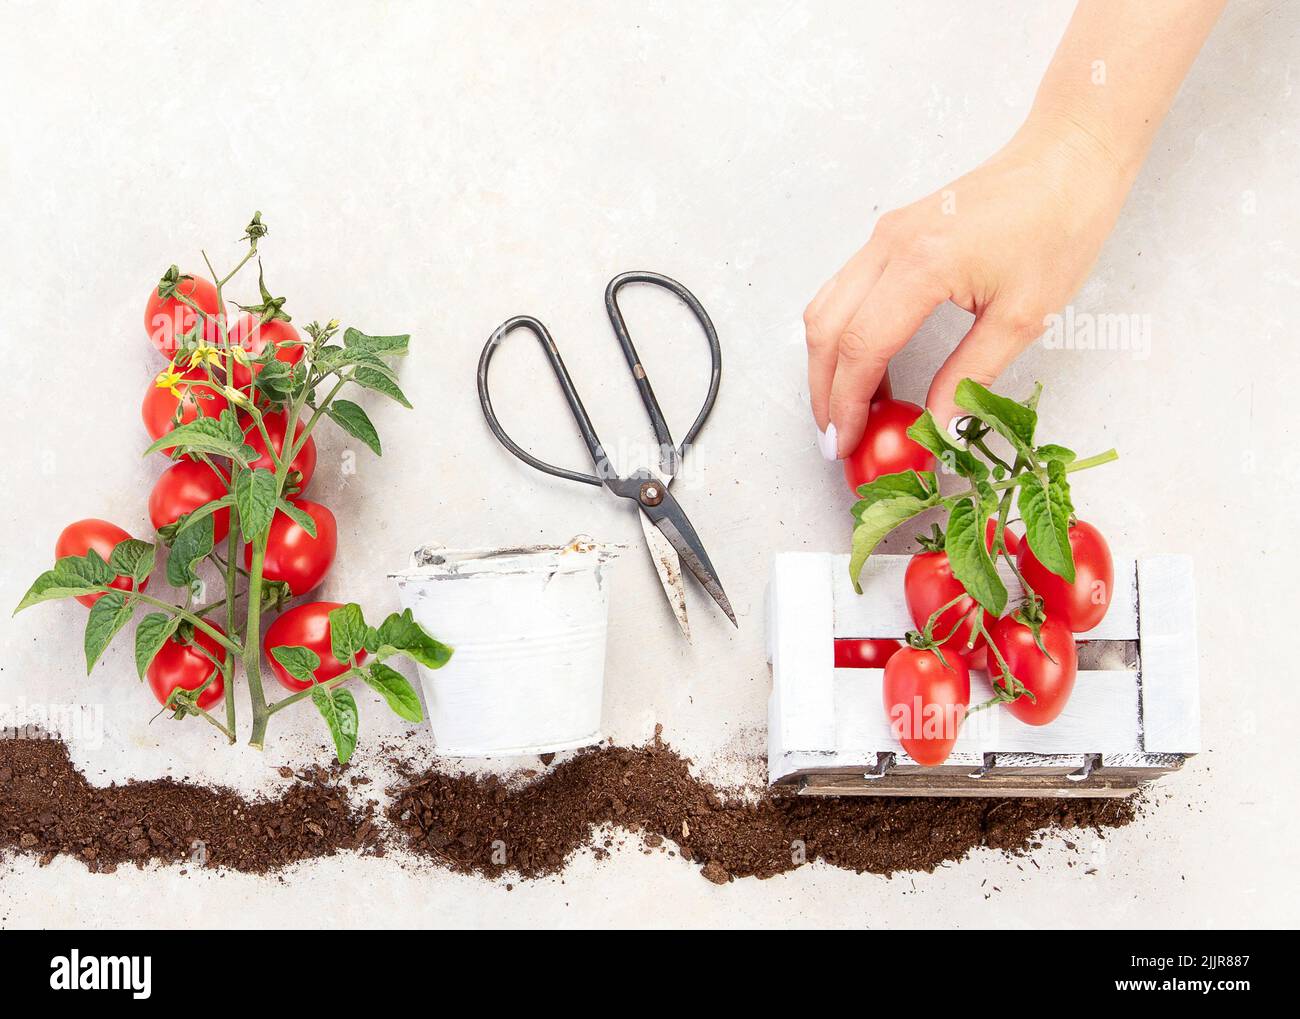 Life cycle of tomato plant. Growth stages from seed to flowering and fruiting plant with ripe red tomatoes on a white background. Top view. Stock Photo